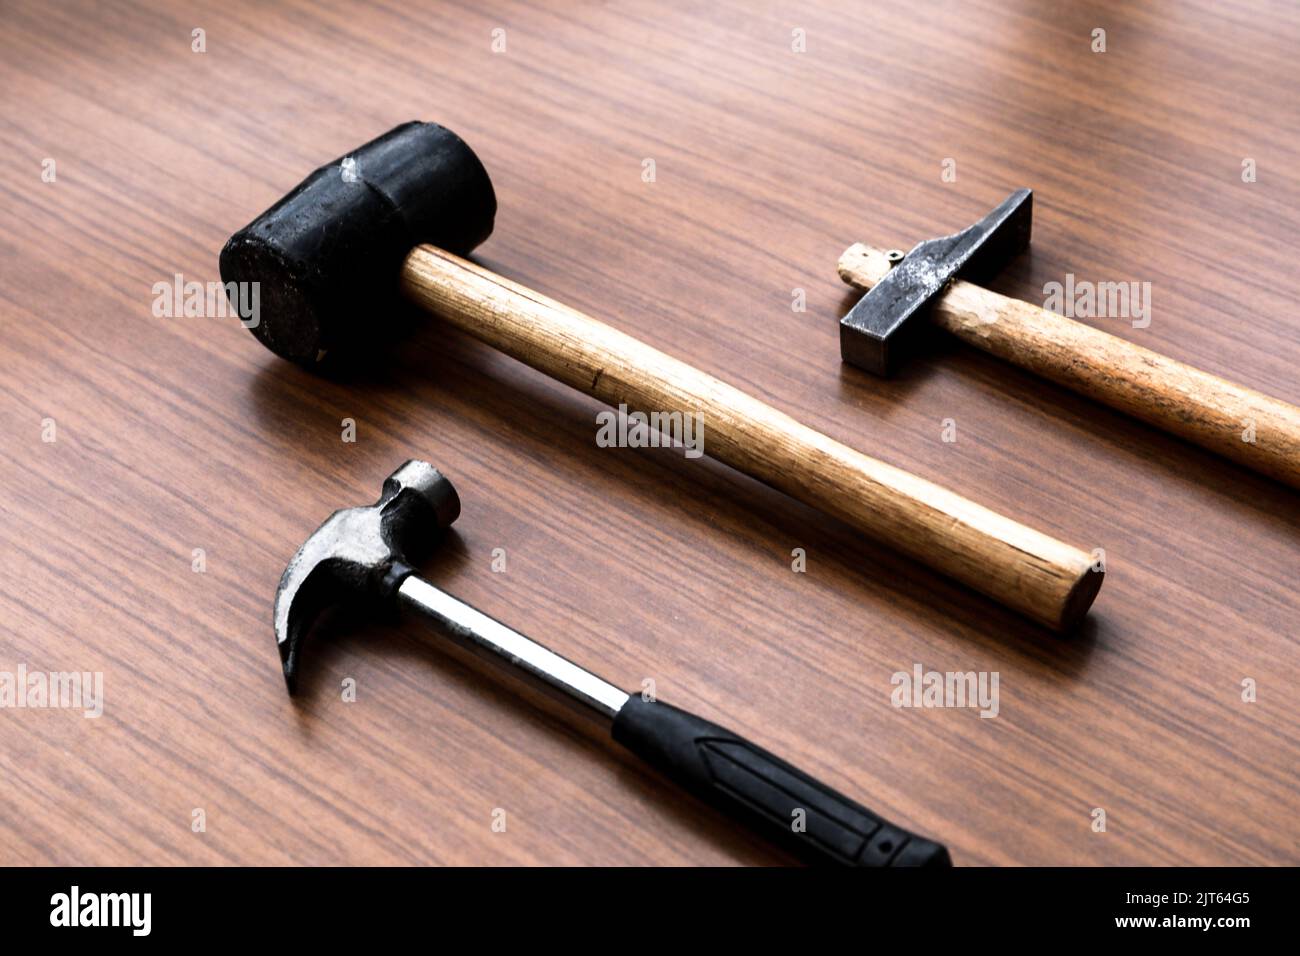 A claw hammer, a sledgehammer, and a rubber mallet on a wooden background. Stock Photo